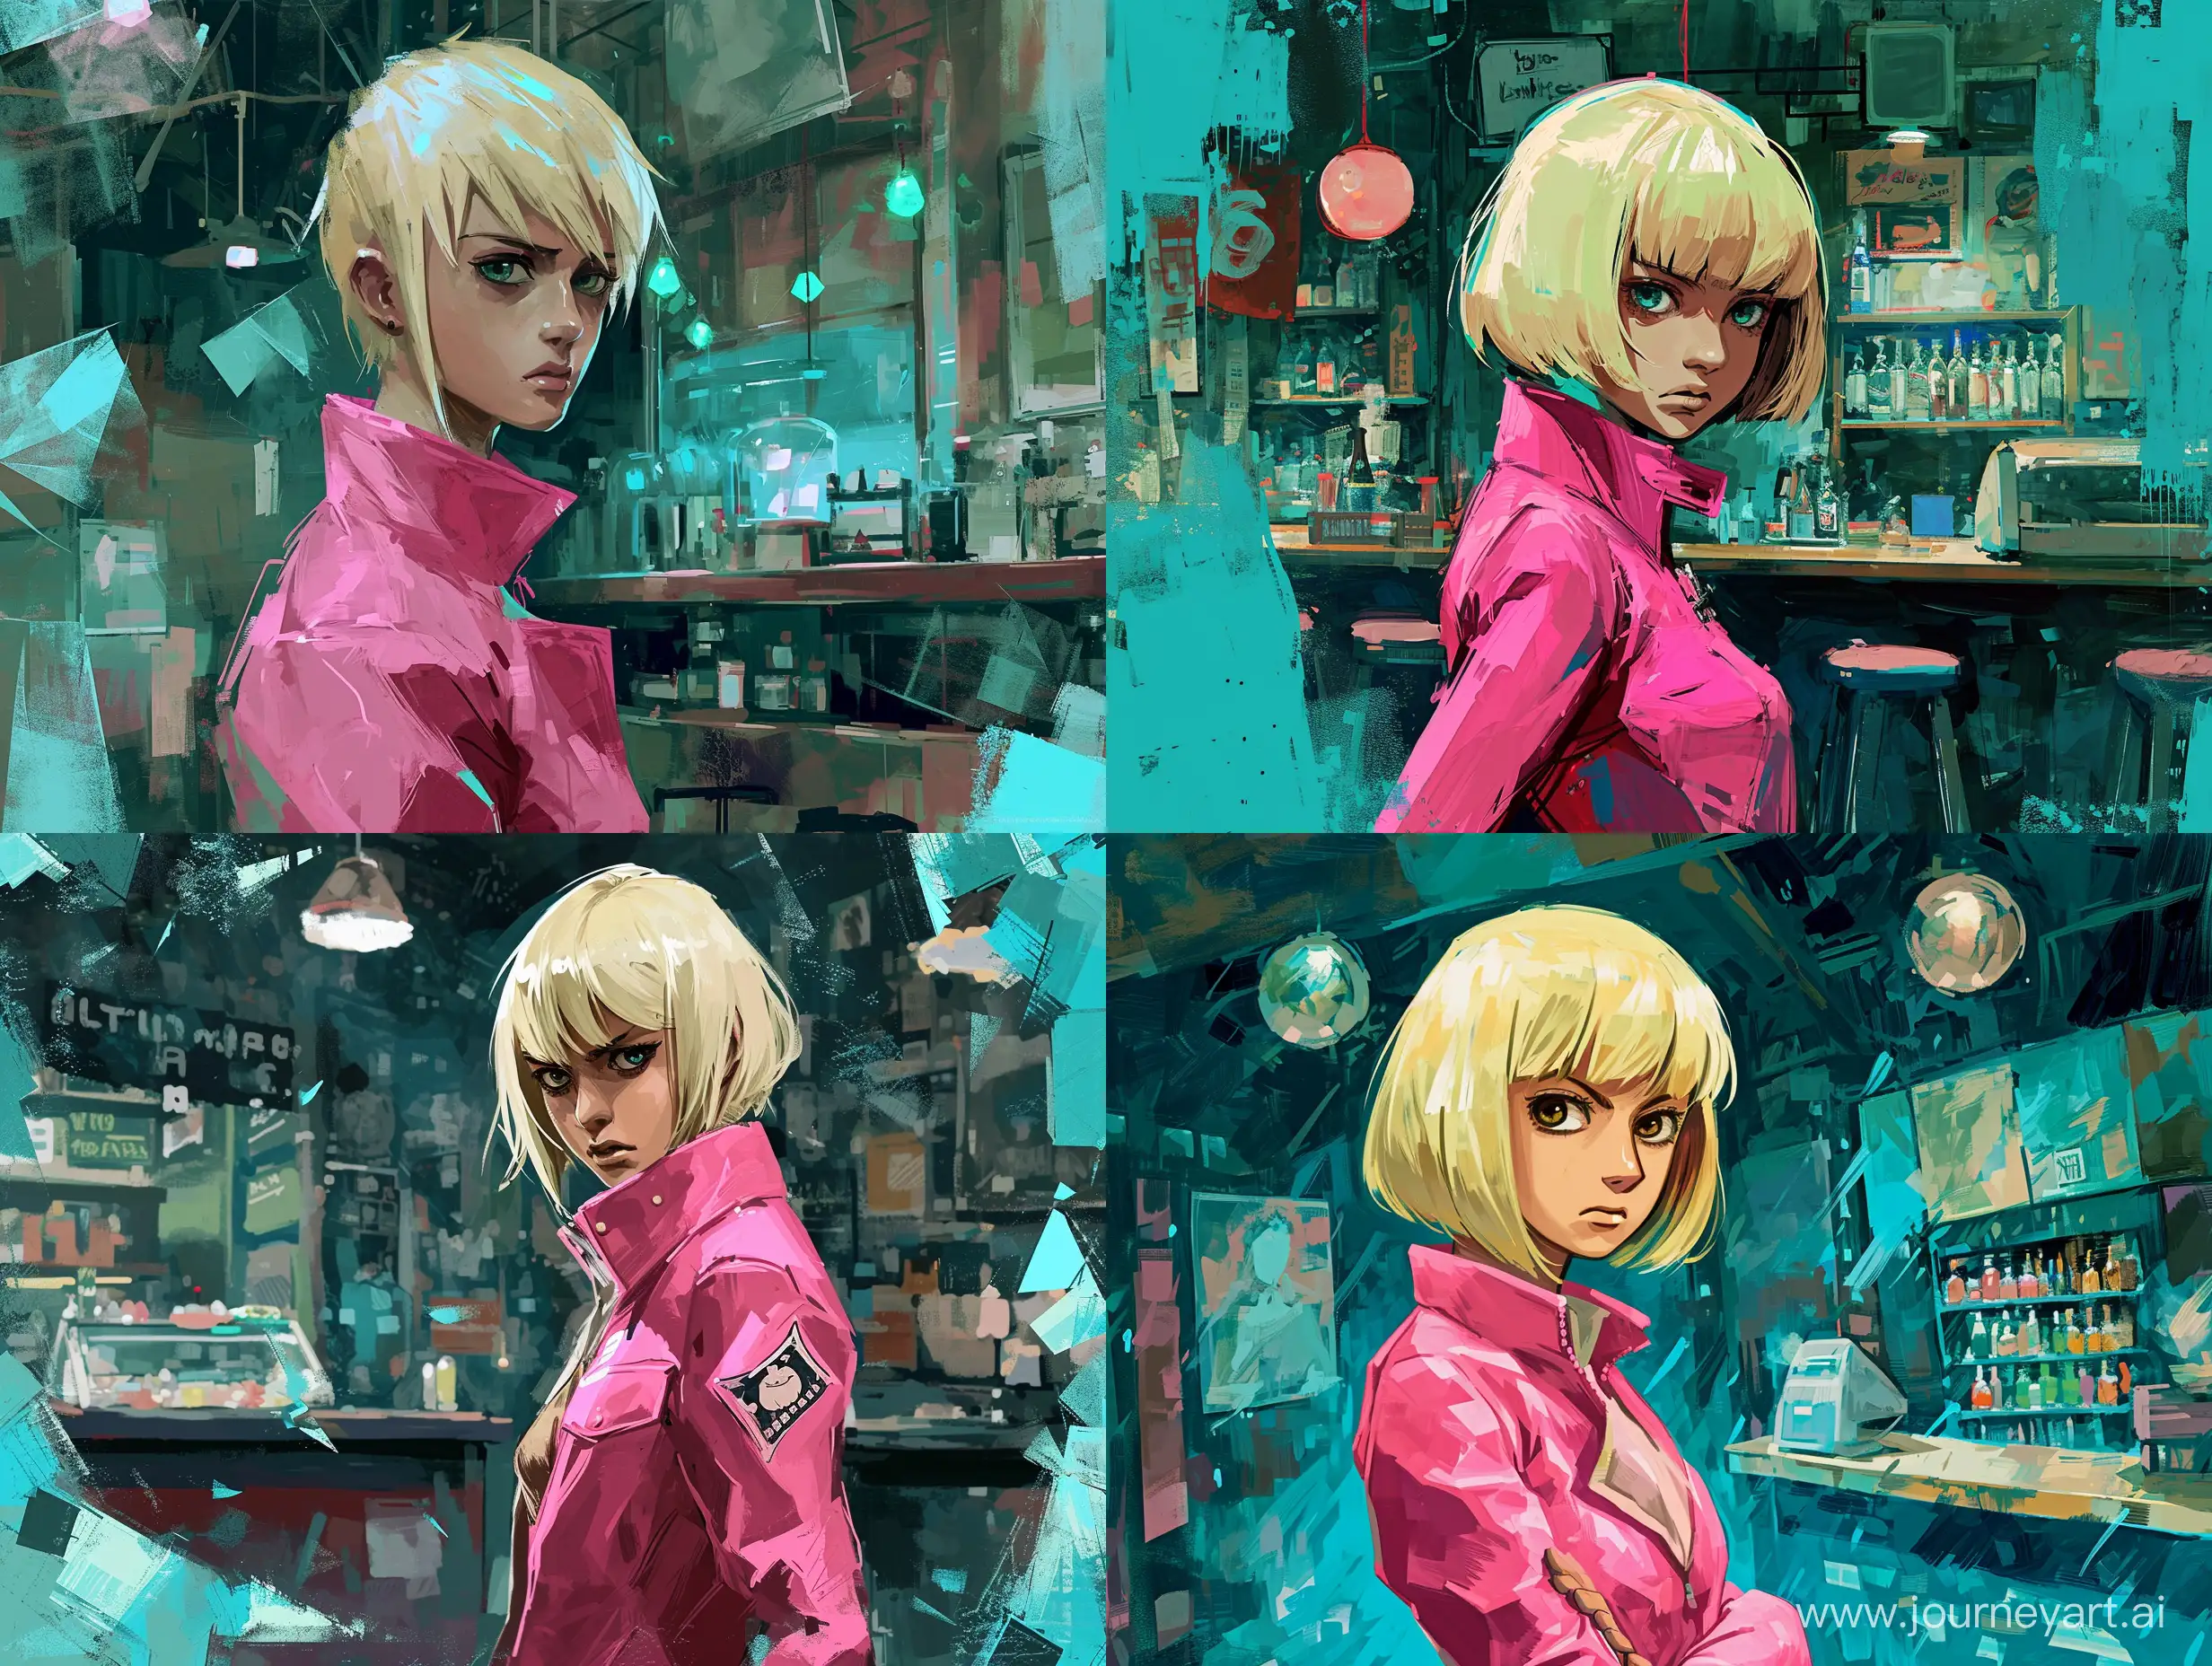 kira yoshikage from jojo bizzare adventure blonde short haircut and pink jacket, modern night shop background drawn with abstract and geometric shapes with cool turquoise colors, very rough and simple oil brush strokes with realistic light, alberto mielgo style semi-stylized style, rich realistic colors --v 6